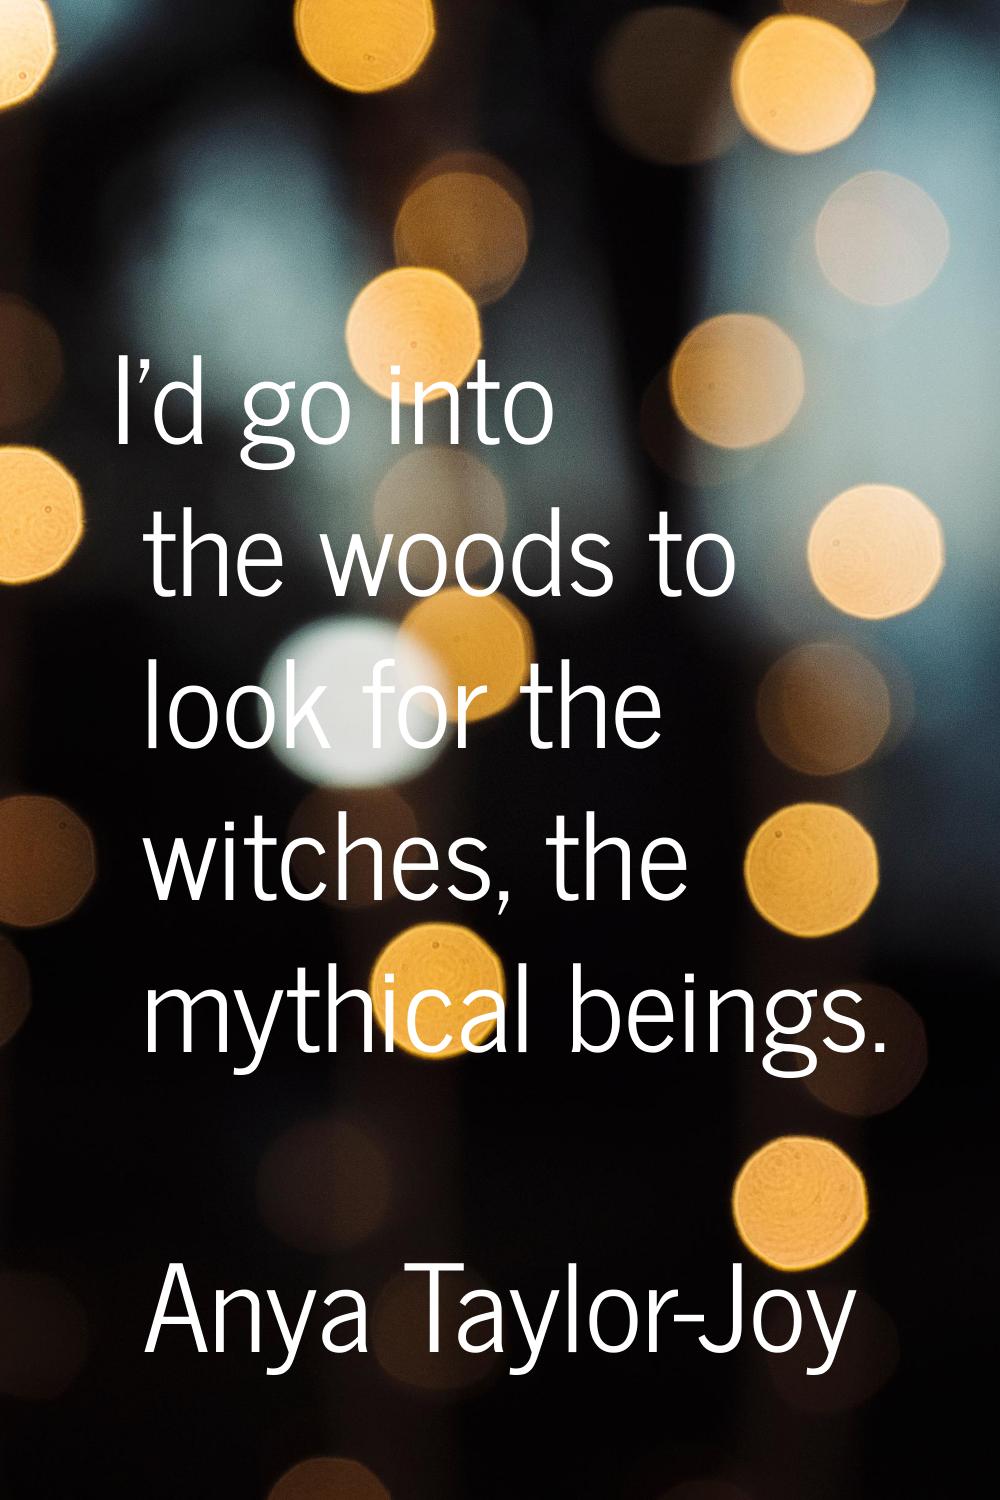 I'd go into the woods to look for the witches, the mythical beings.